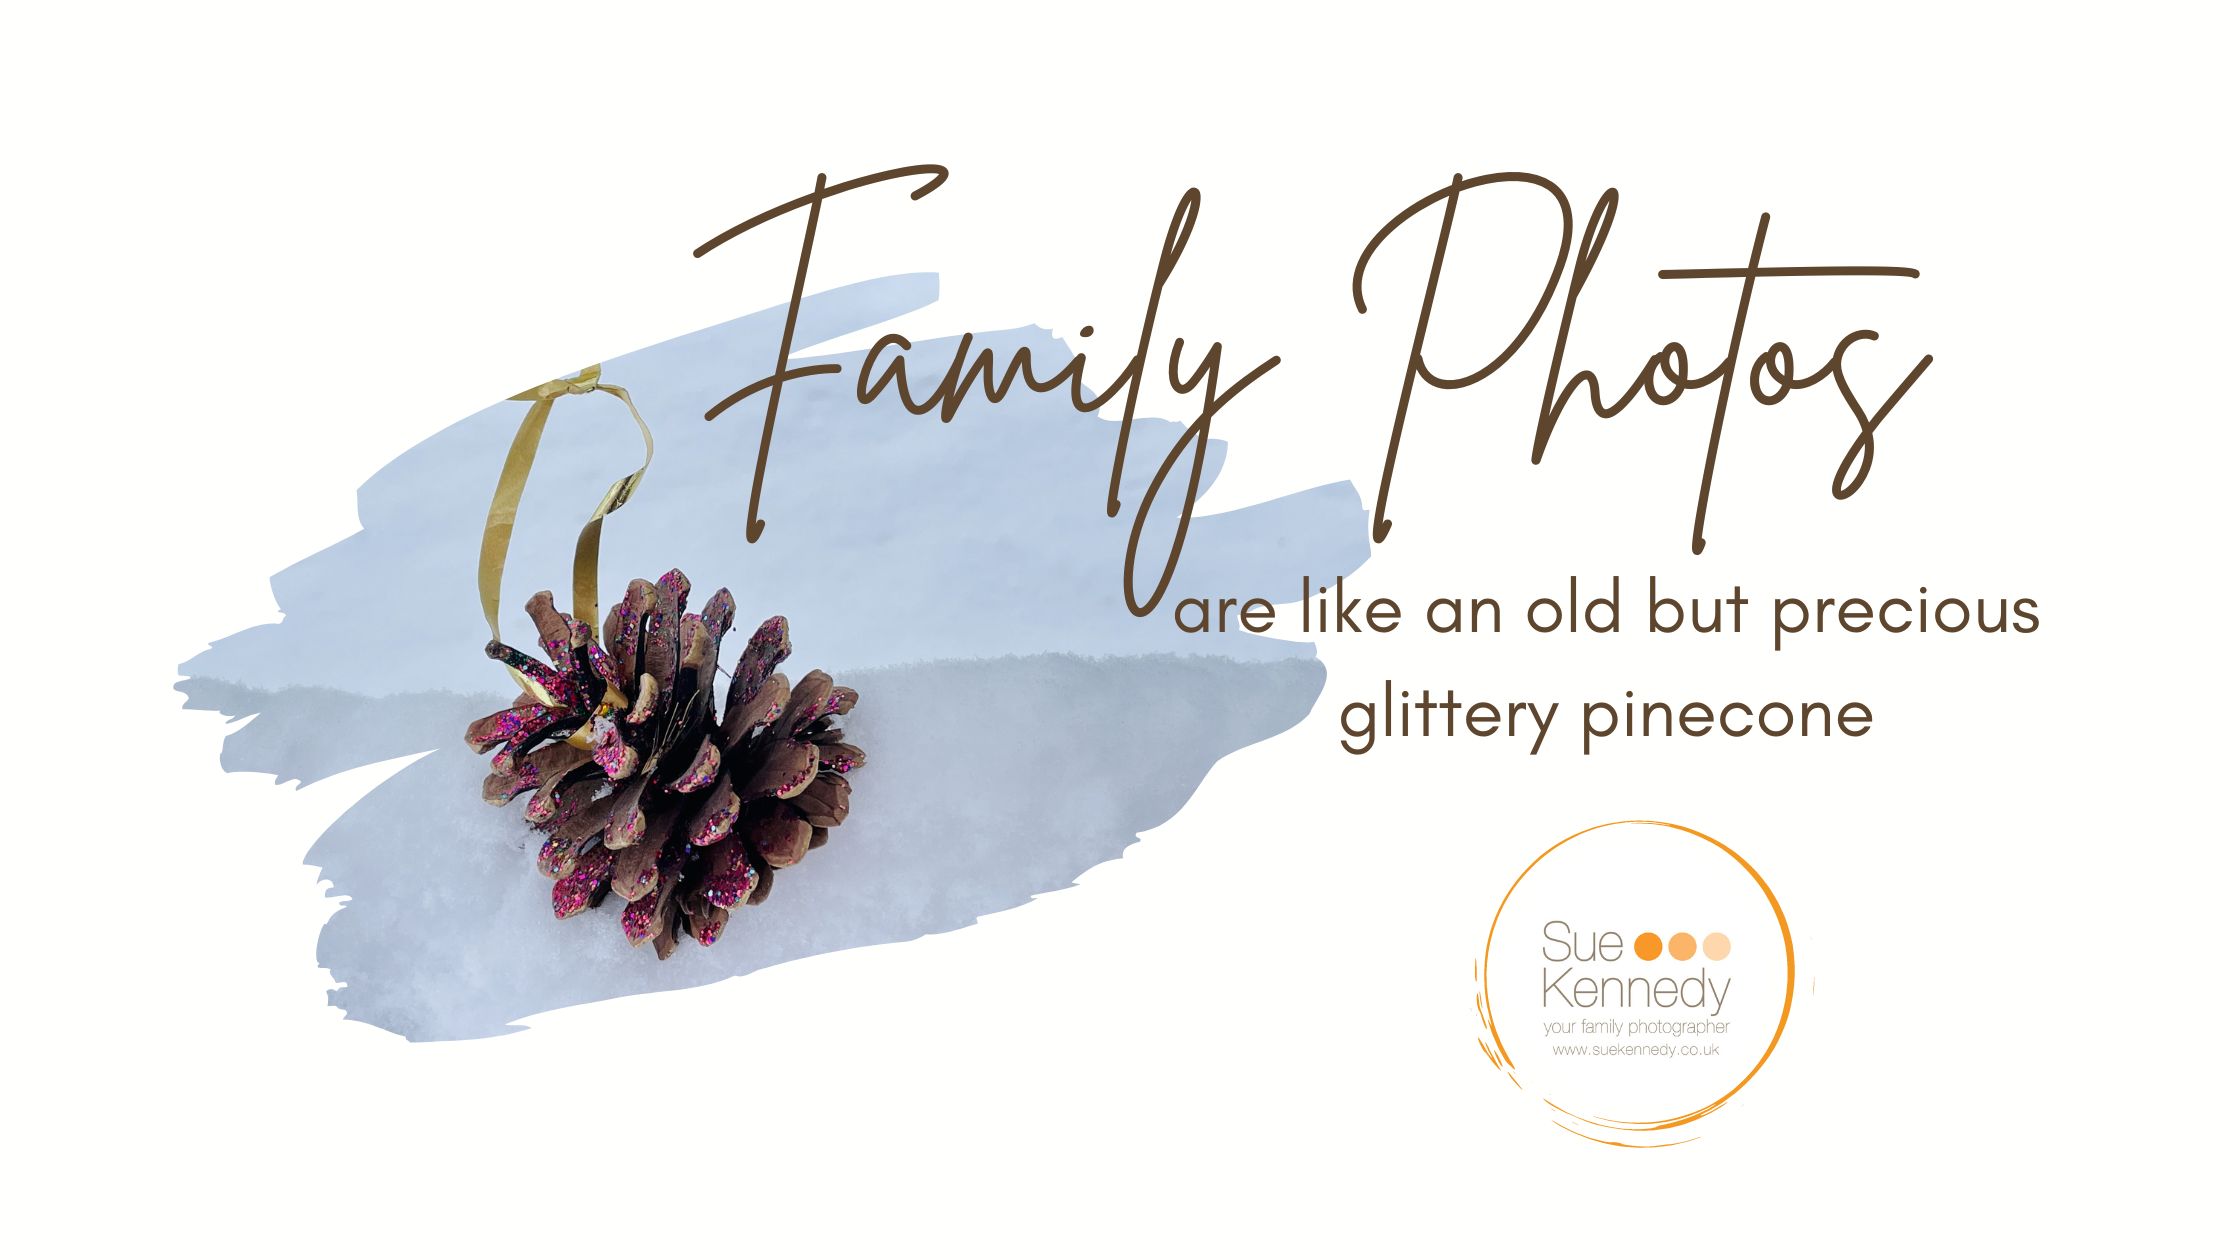 blog header graphic for family photos are like an old but precious glittery pinecone from Sue Kennedy Photography